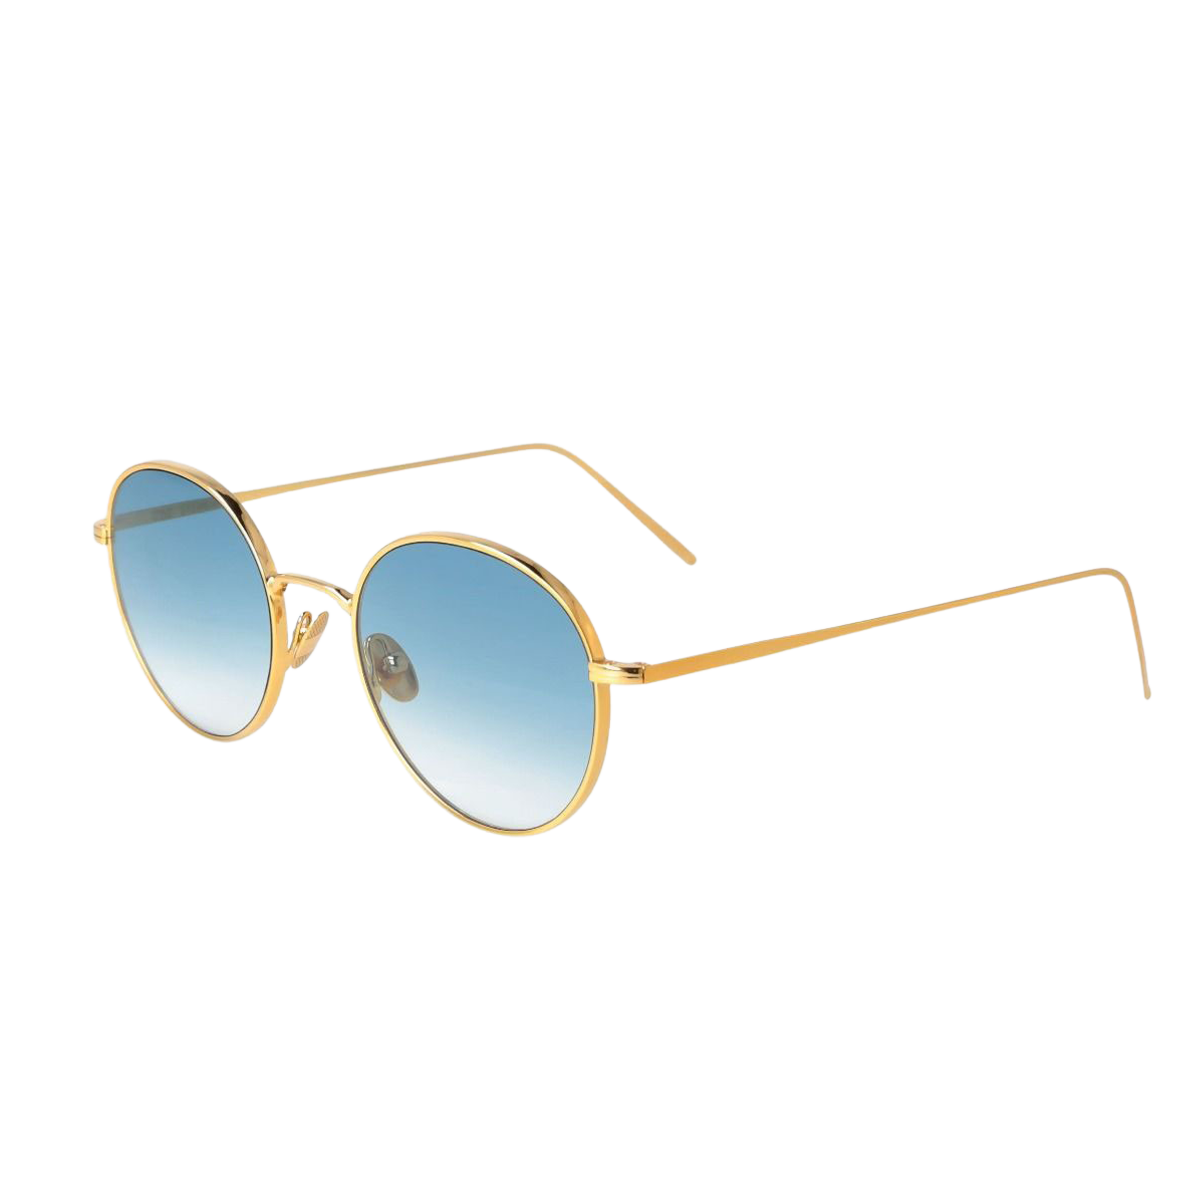 The Bespoke Dudes Ulster 24K Gold Gradient Blue Lenses 50mm Feature